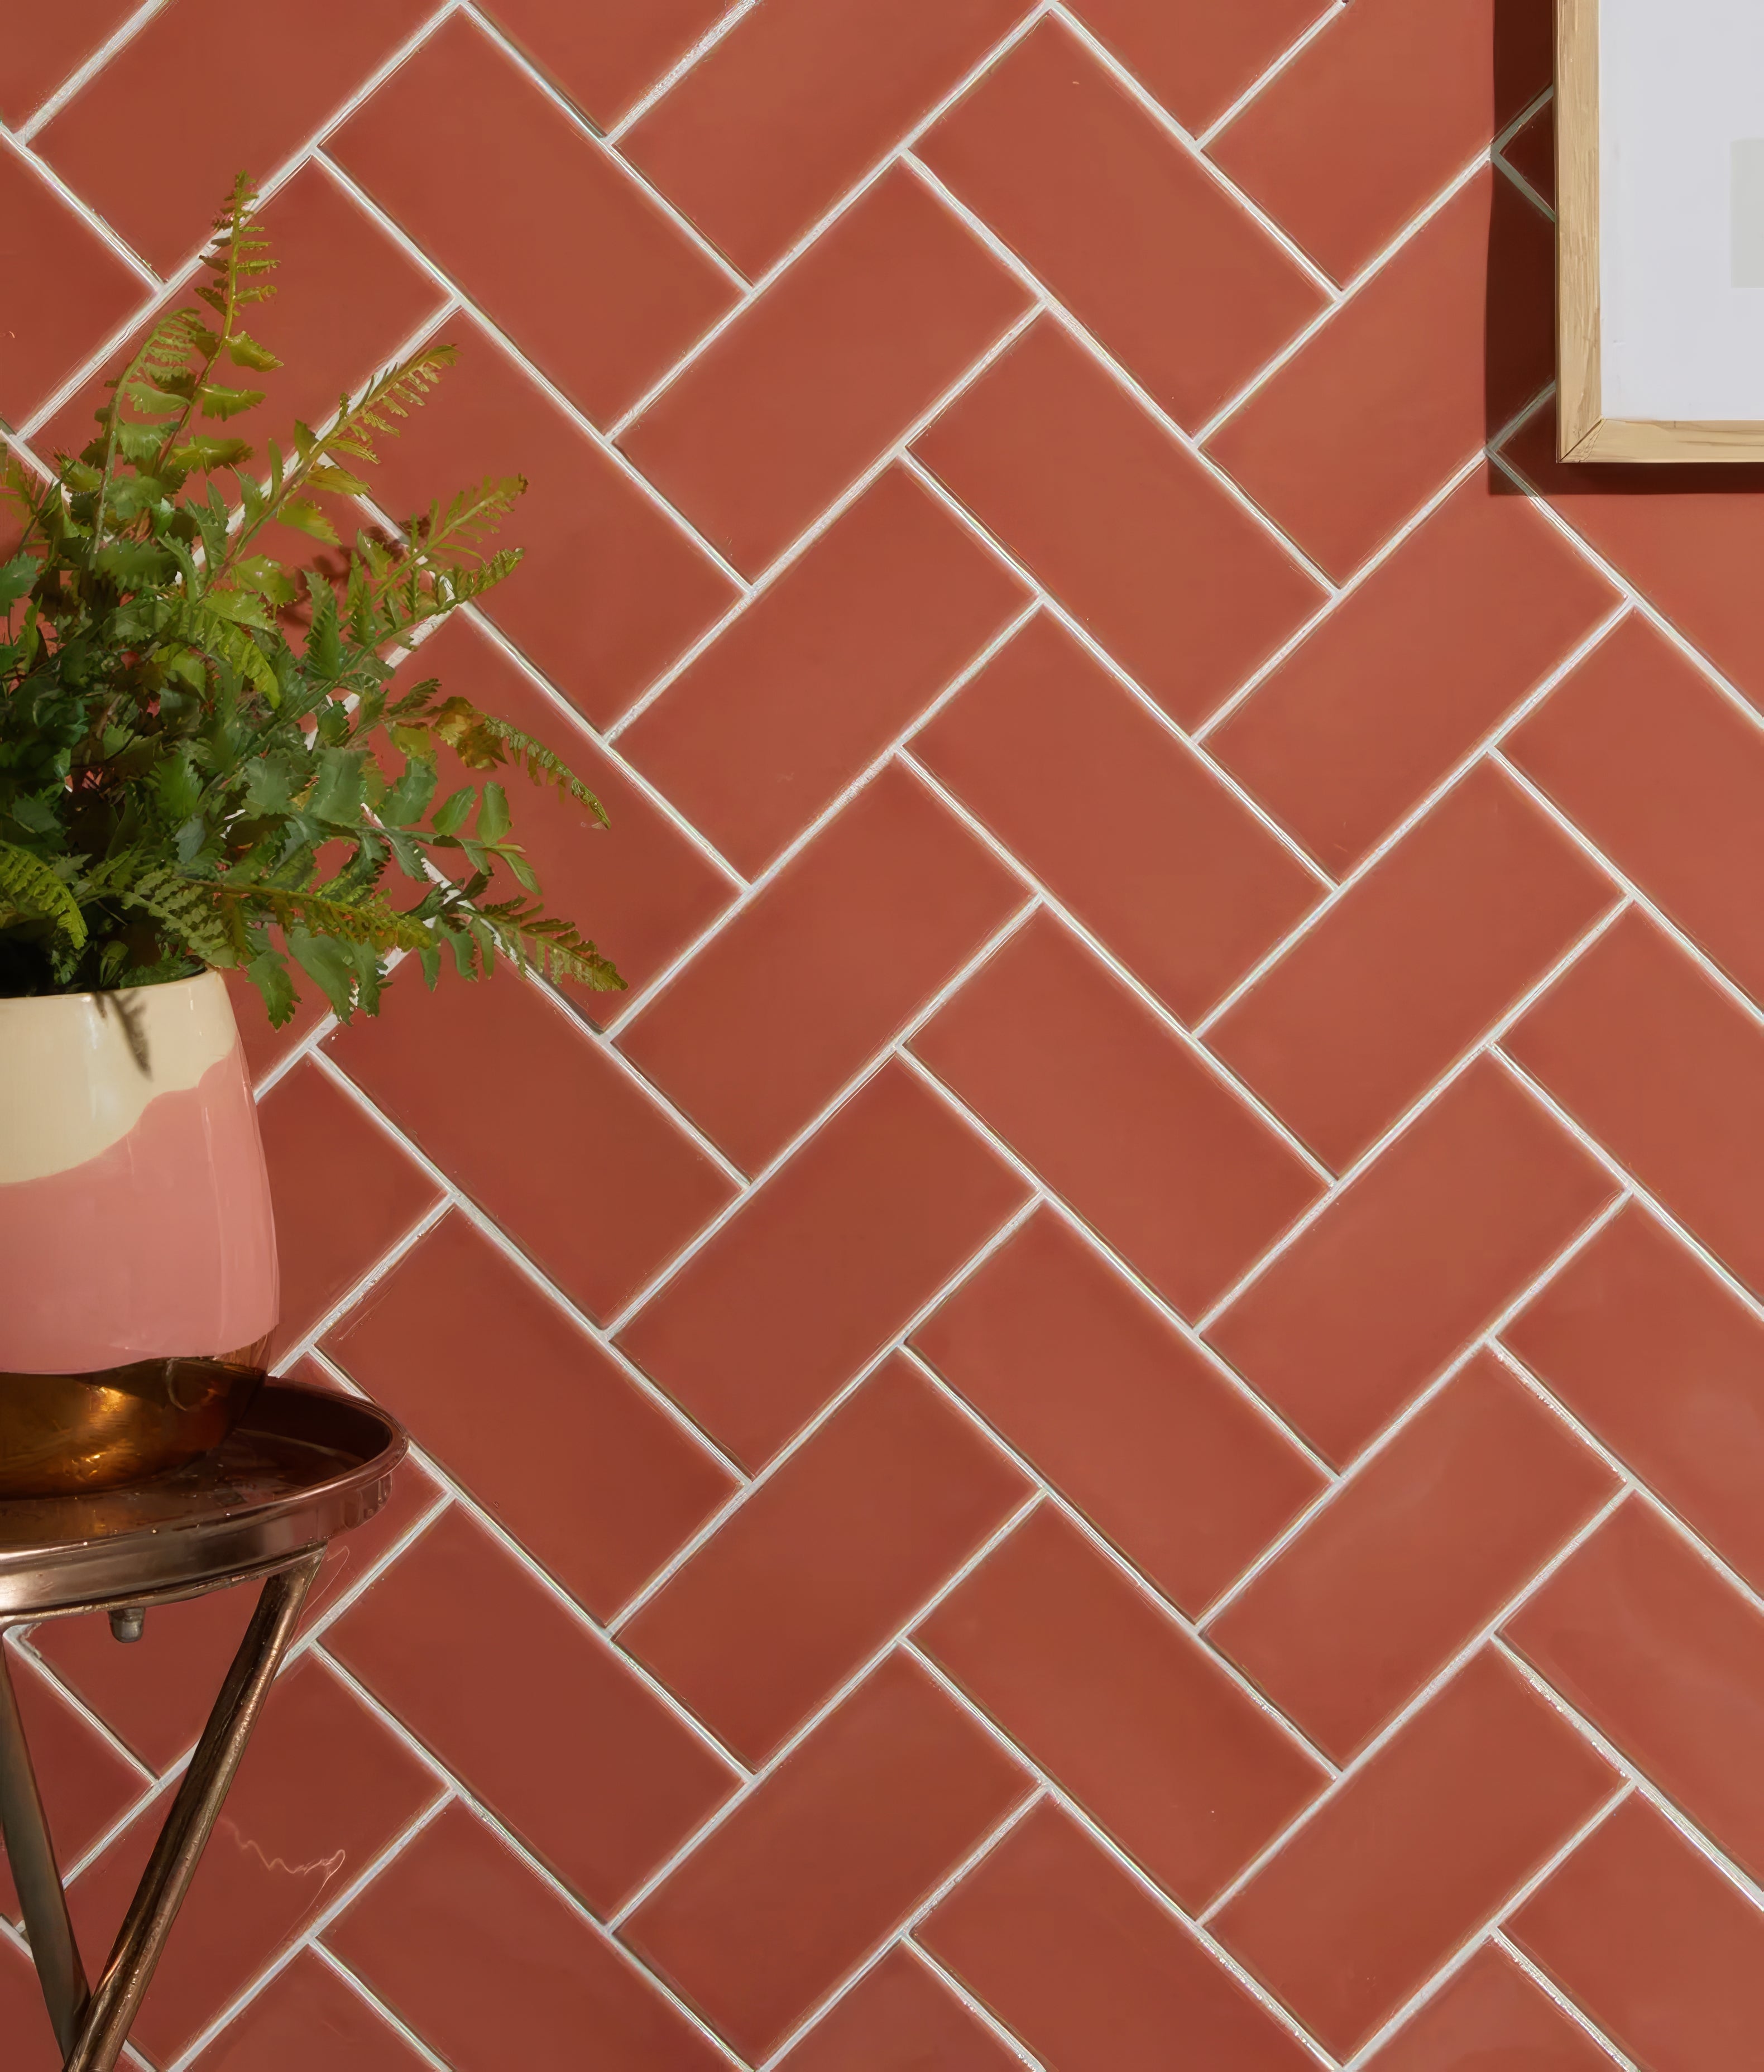 Tunstall Ceramic Coral Brick - Hyperion Tiles